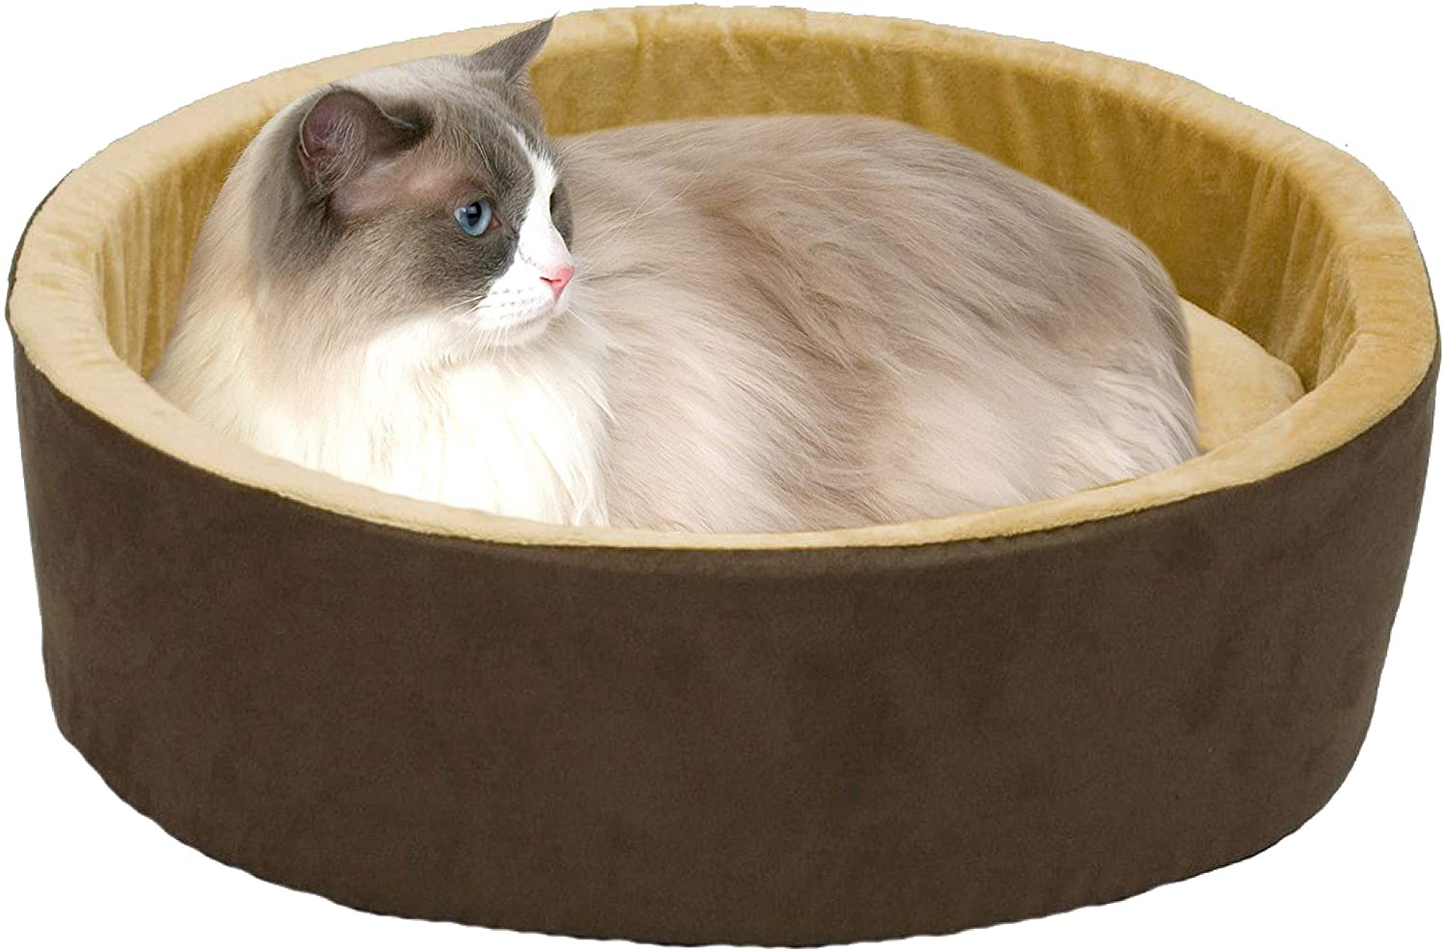 K&H Pet Products Heated Thermo-Kitty Heated Cat Bed Mocha/Tan - Multiple Sizes